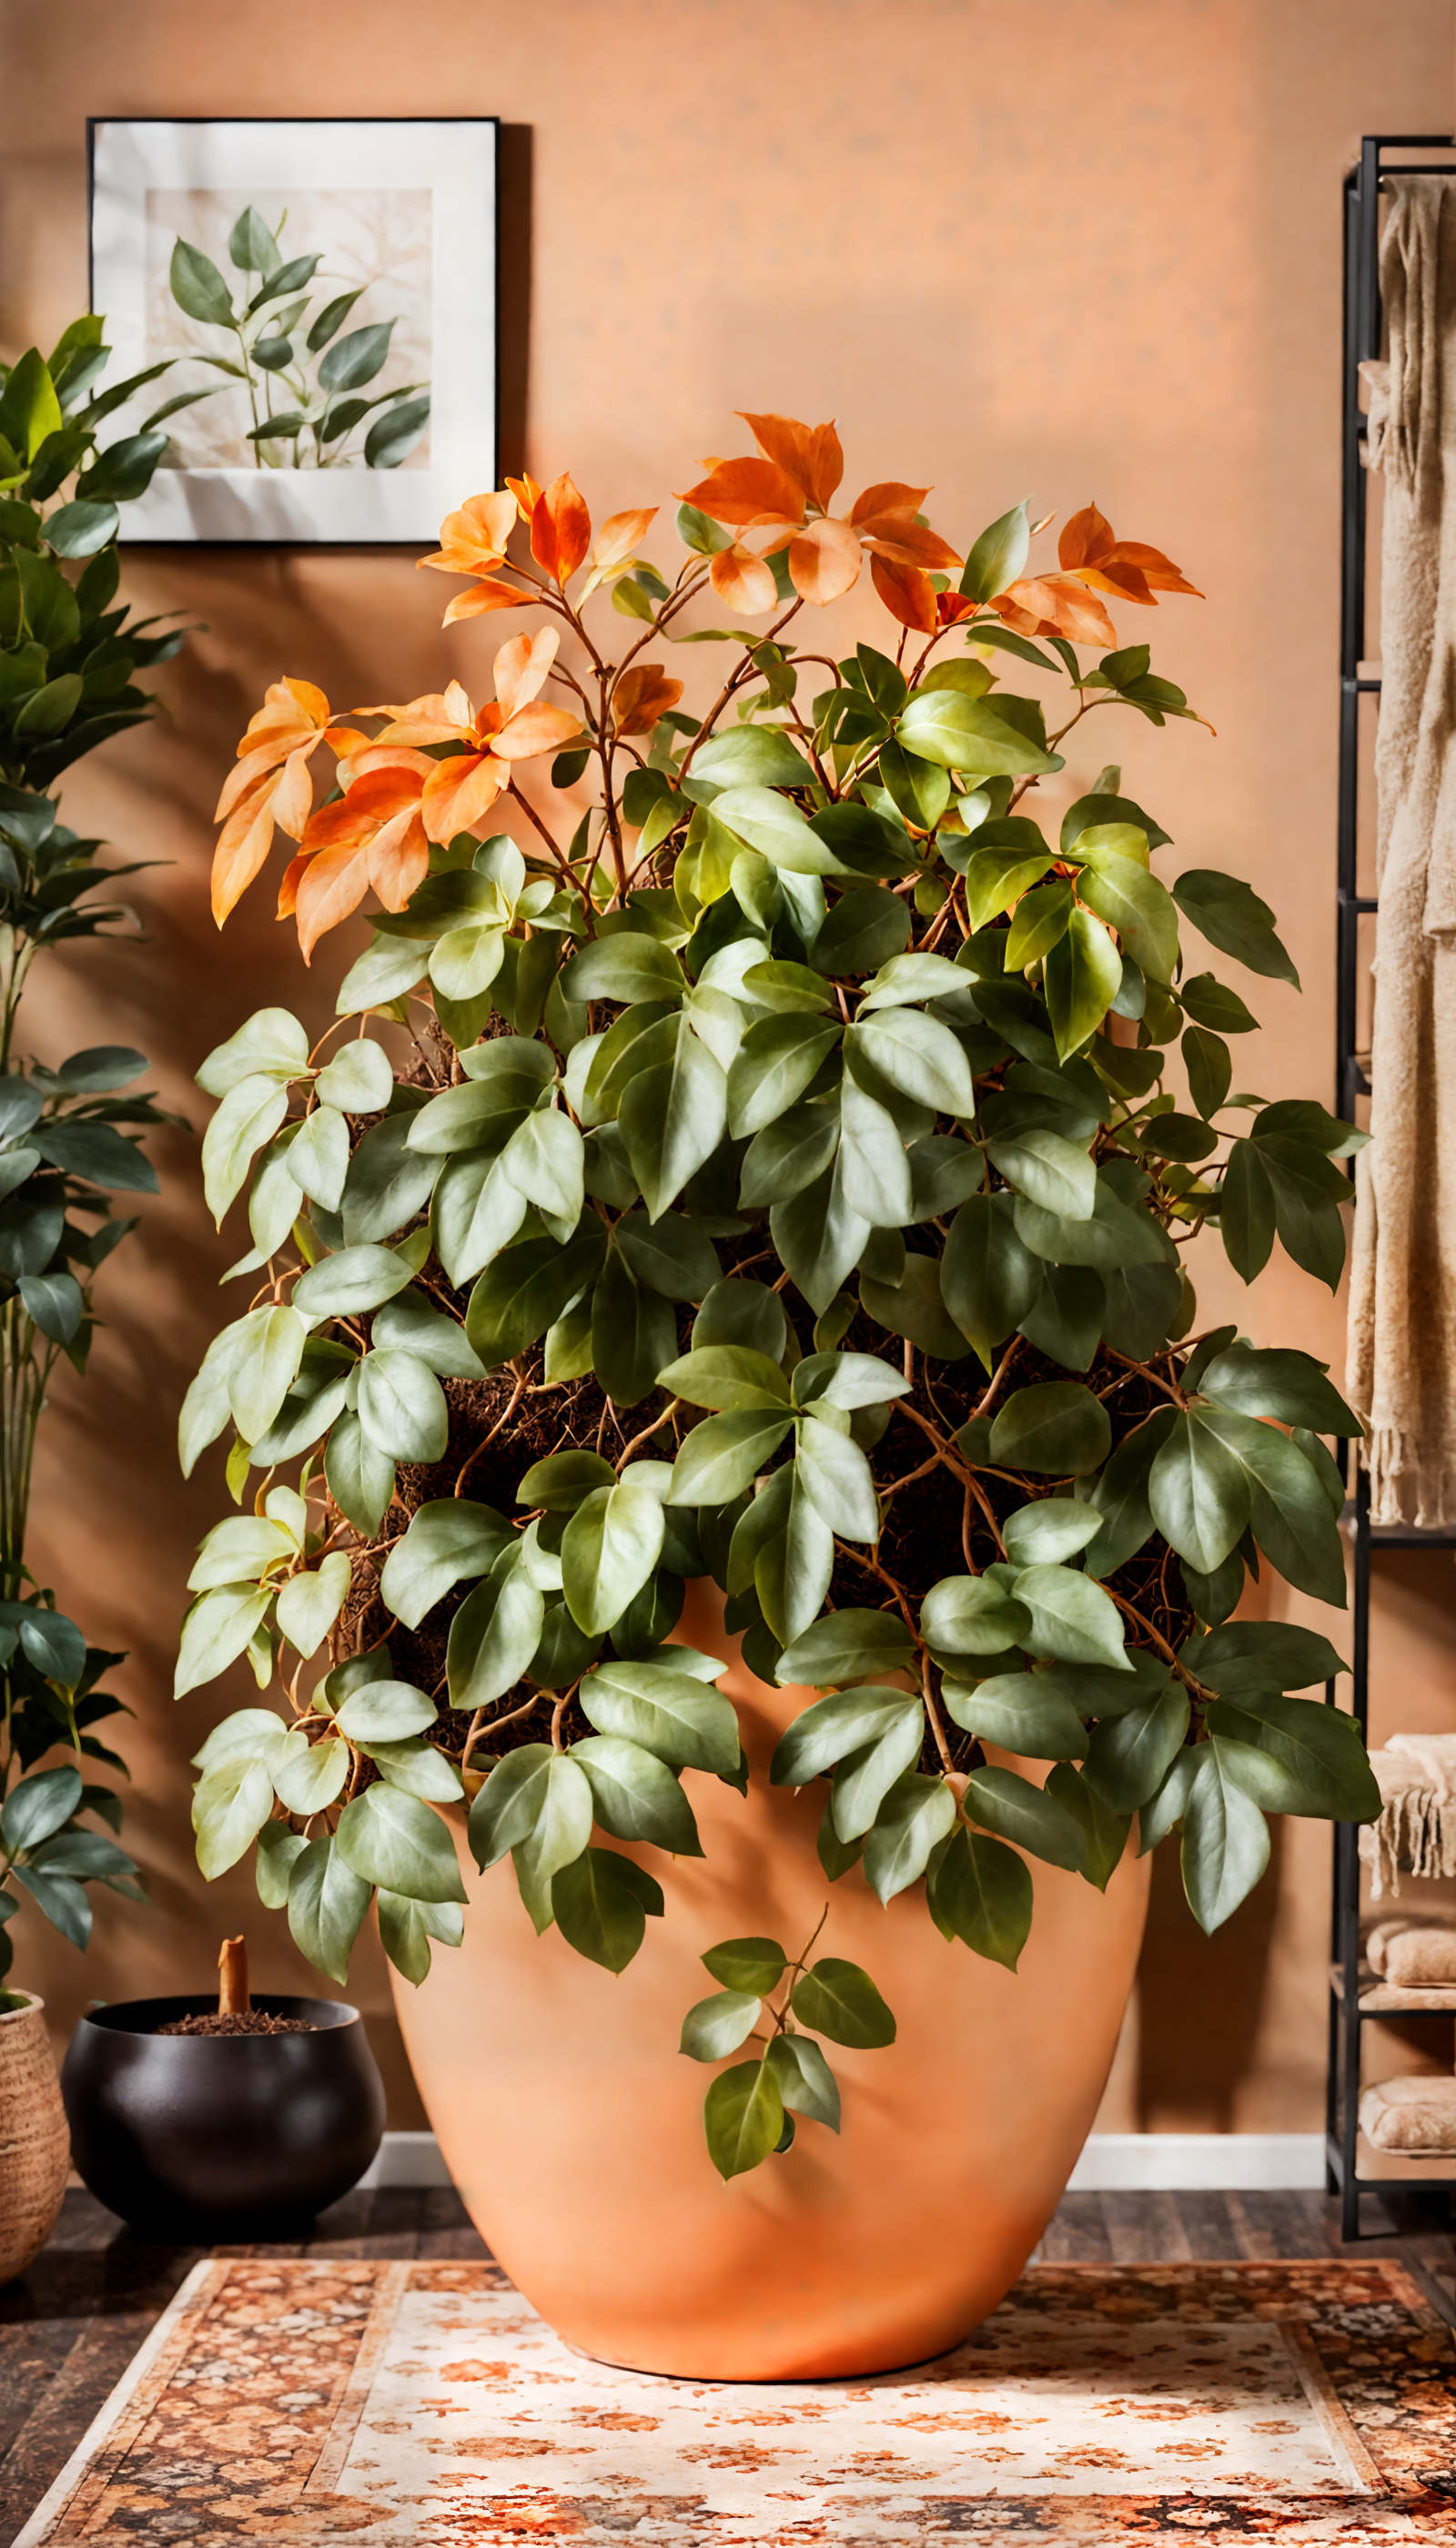 Cissus alata with broad orange leaves in a rustic bowl planter on a wooden floor, indoor setting.